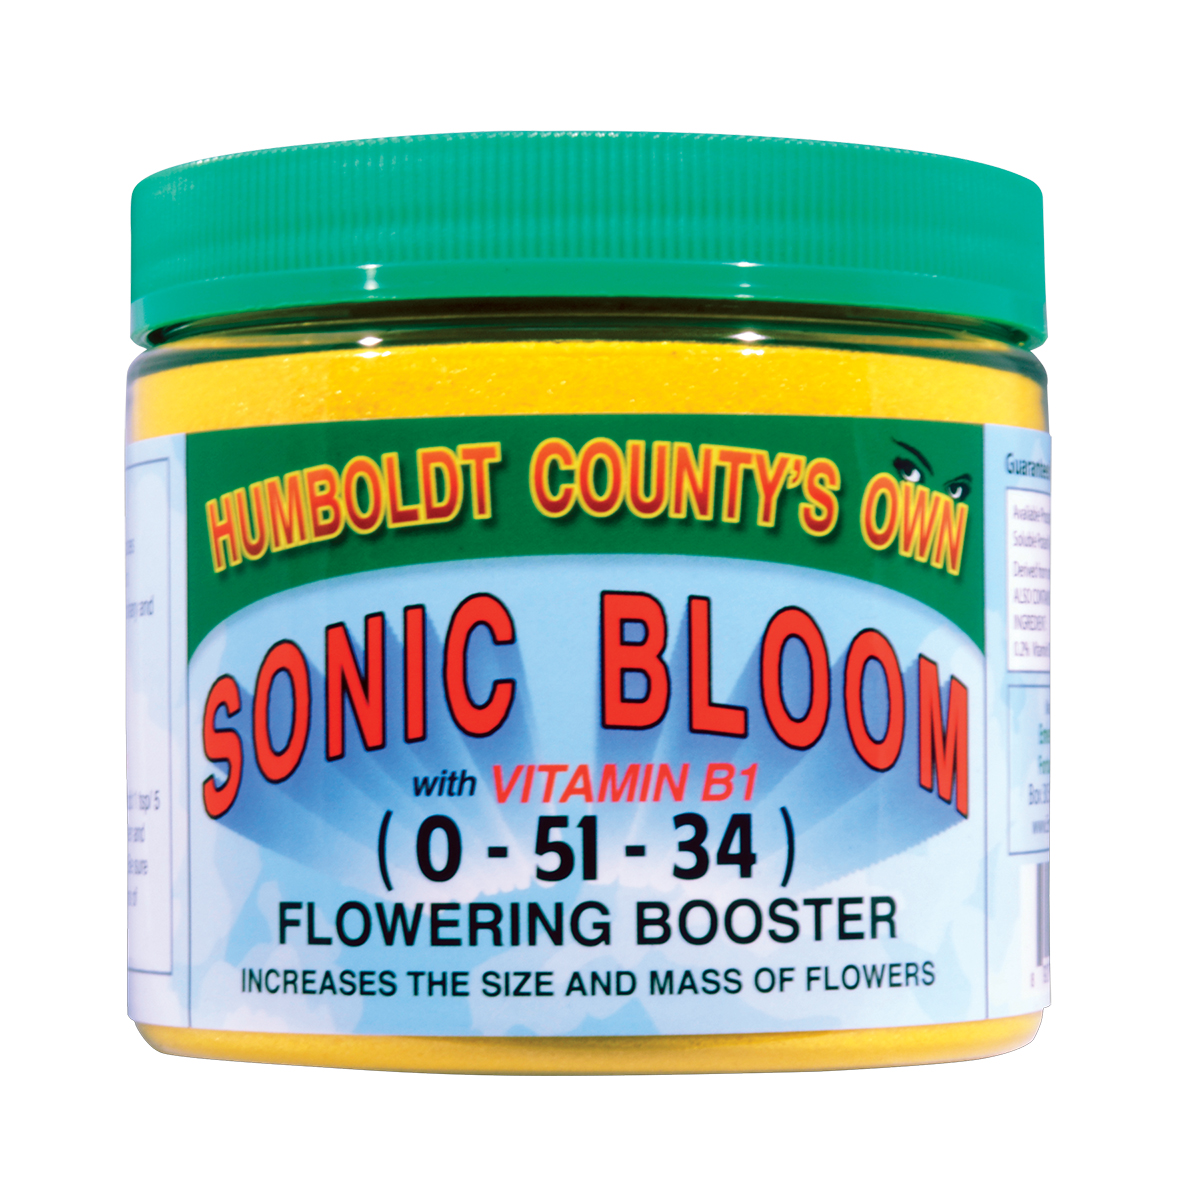 Picture for Humboldt County's Own Sonic Bloom, 1 lb